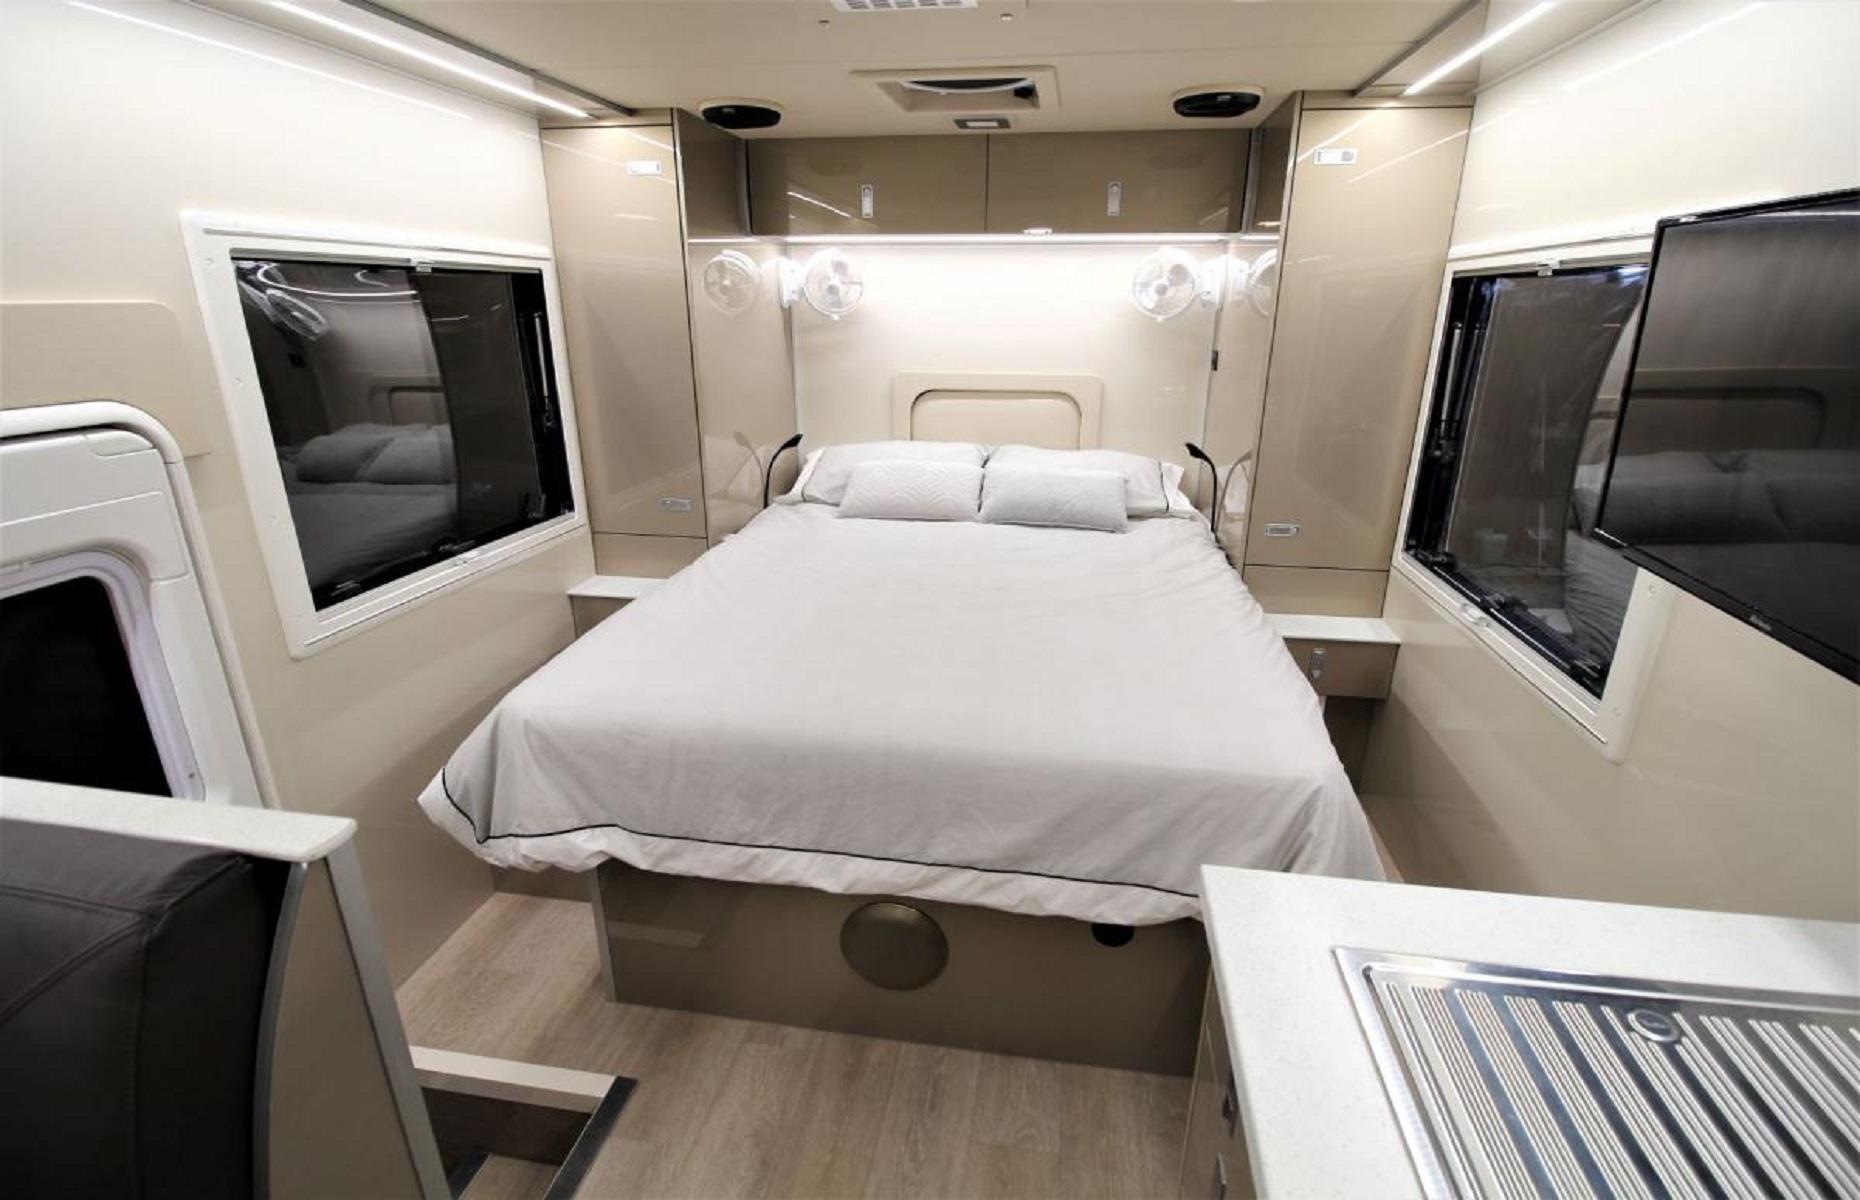 <p>Amazingly, the vehicle can sleep up to 10 people at a time, with space for six on the upper floor. Not one to sacrifice style for substance, the bespoke motorhome also includes a master suite on the main floor. There's even the optional addition of a lift-up electric bed, with a lounge space underneath – the perfect solution for guest accommodation. It's really no wonder the price of this vehicle <a href="https://www.businessinsider.com/custom-rv-expedition-camper-van-traveling-australia-slrv-2019-12?r=US&IR=T#-which-has-a-tv-and-six-single-beds-with-reading-lights-and-individual-windows-13">is said</a> to fall between $670,000 and $1.4 million, depending on your bespoke choices.</p>